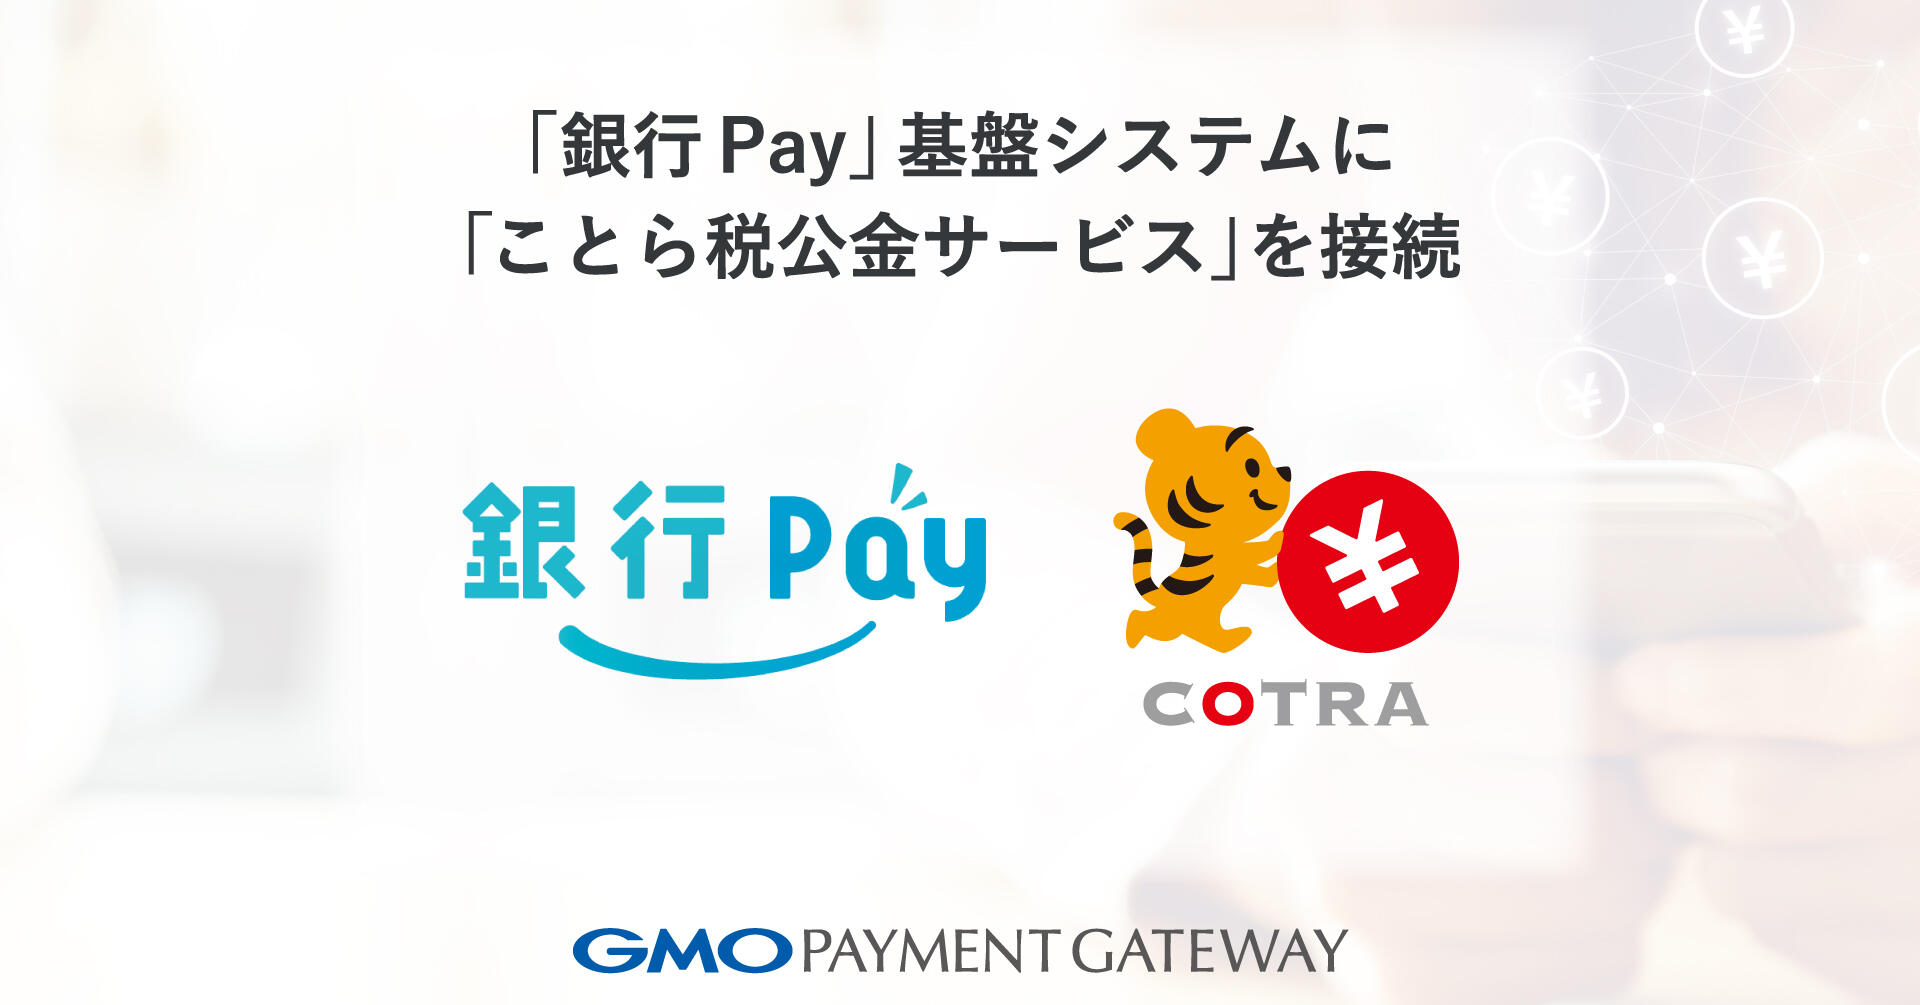 Connecting the "Kotora Tax public fund Service" to the "Ginko Pay" infrastructure system